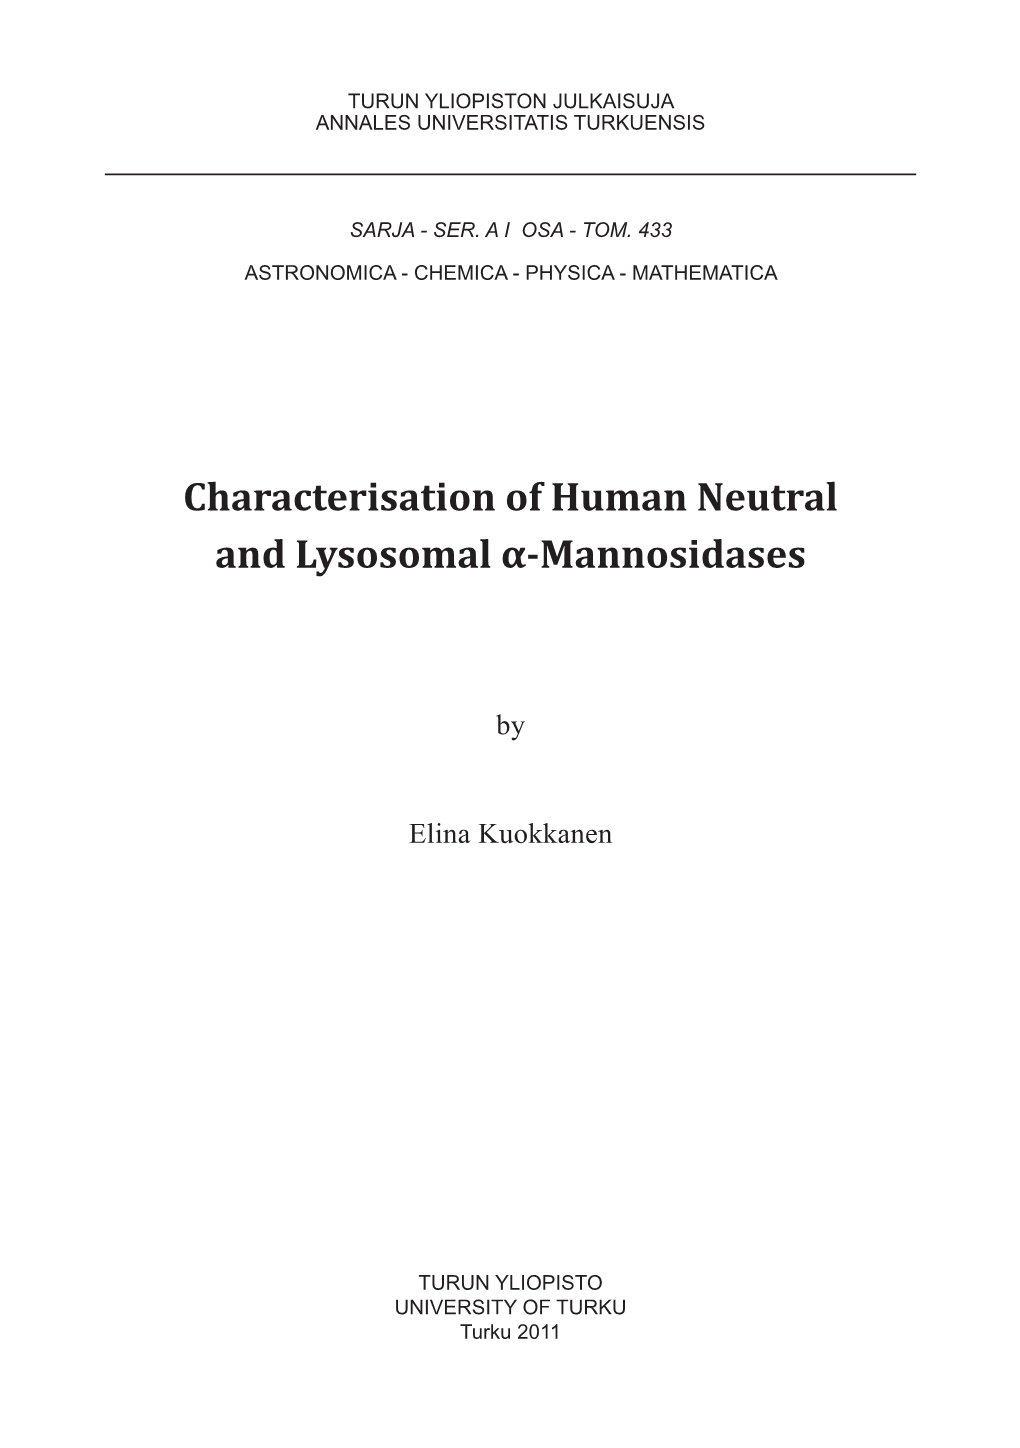 Characterisation of Human Neutral and Lysosomal Α-Mannosidases